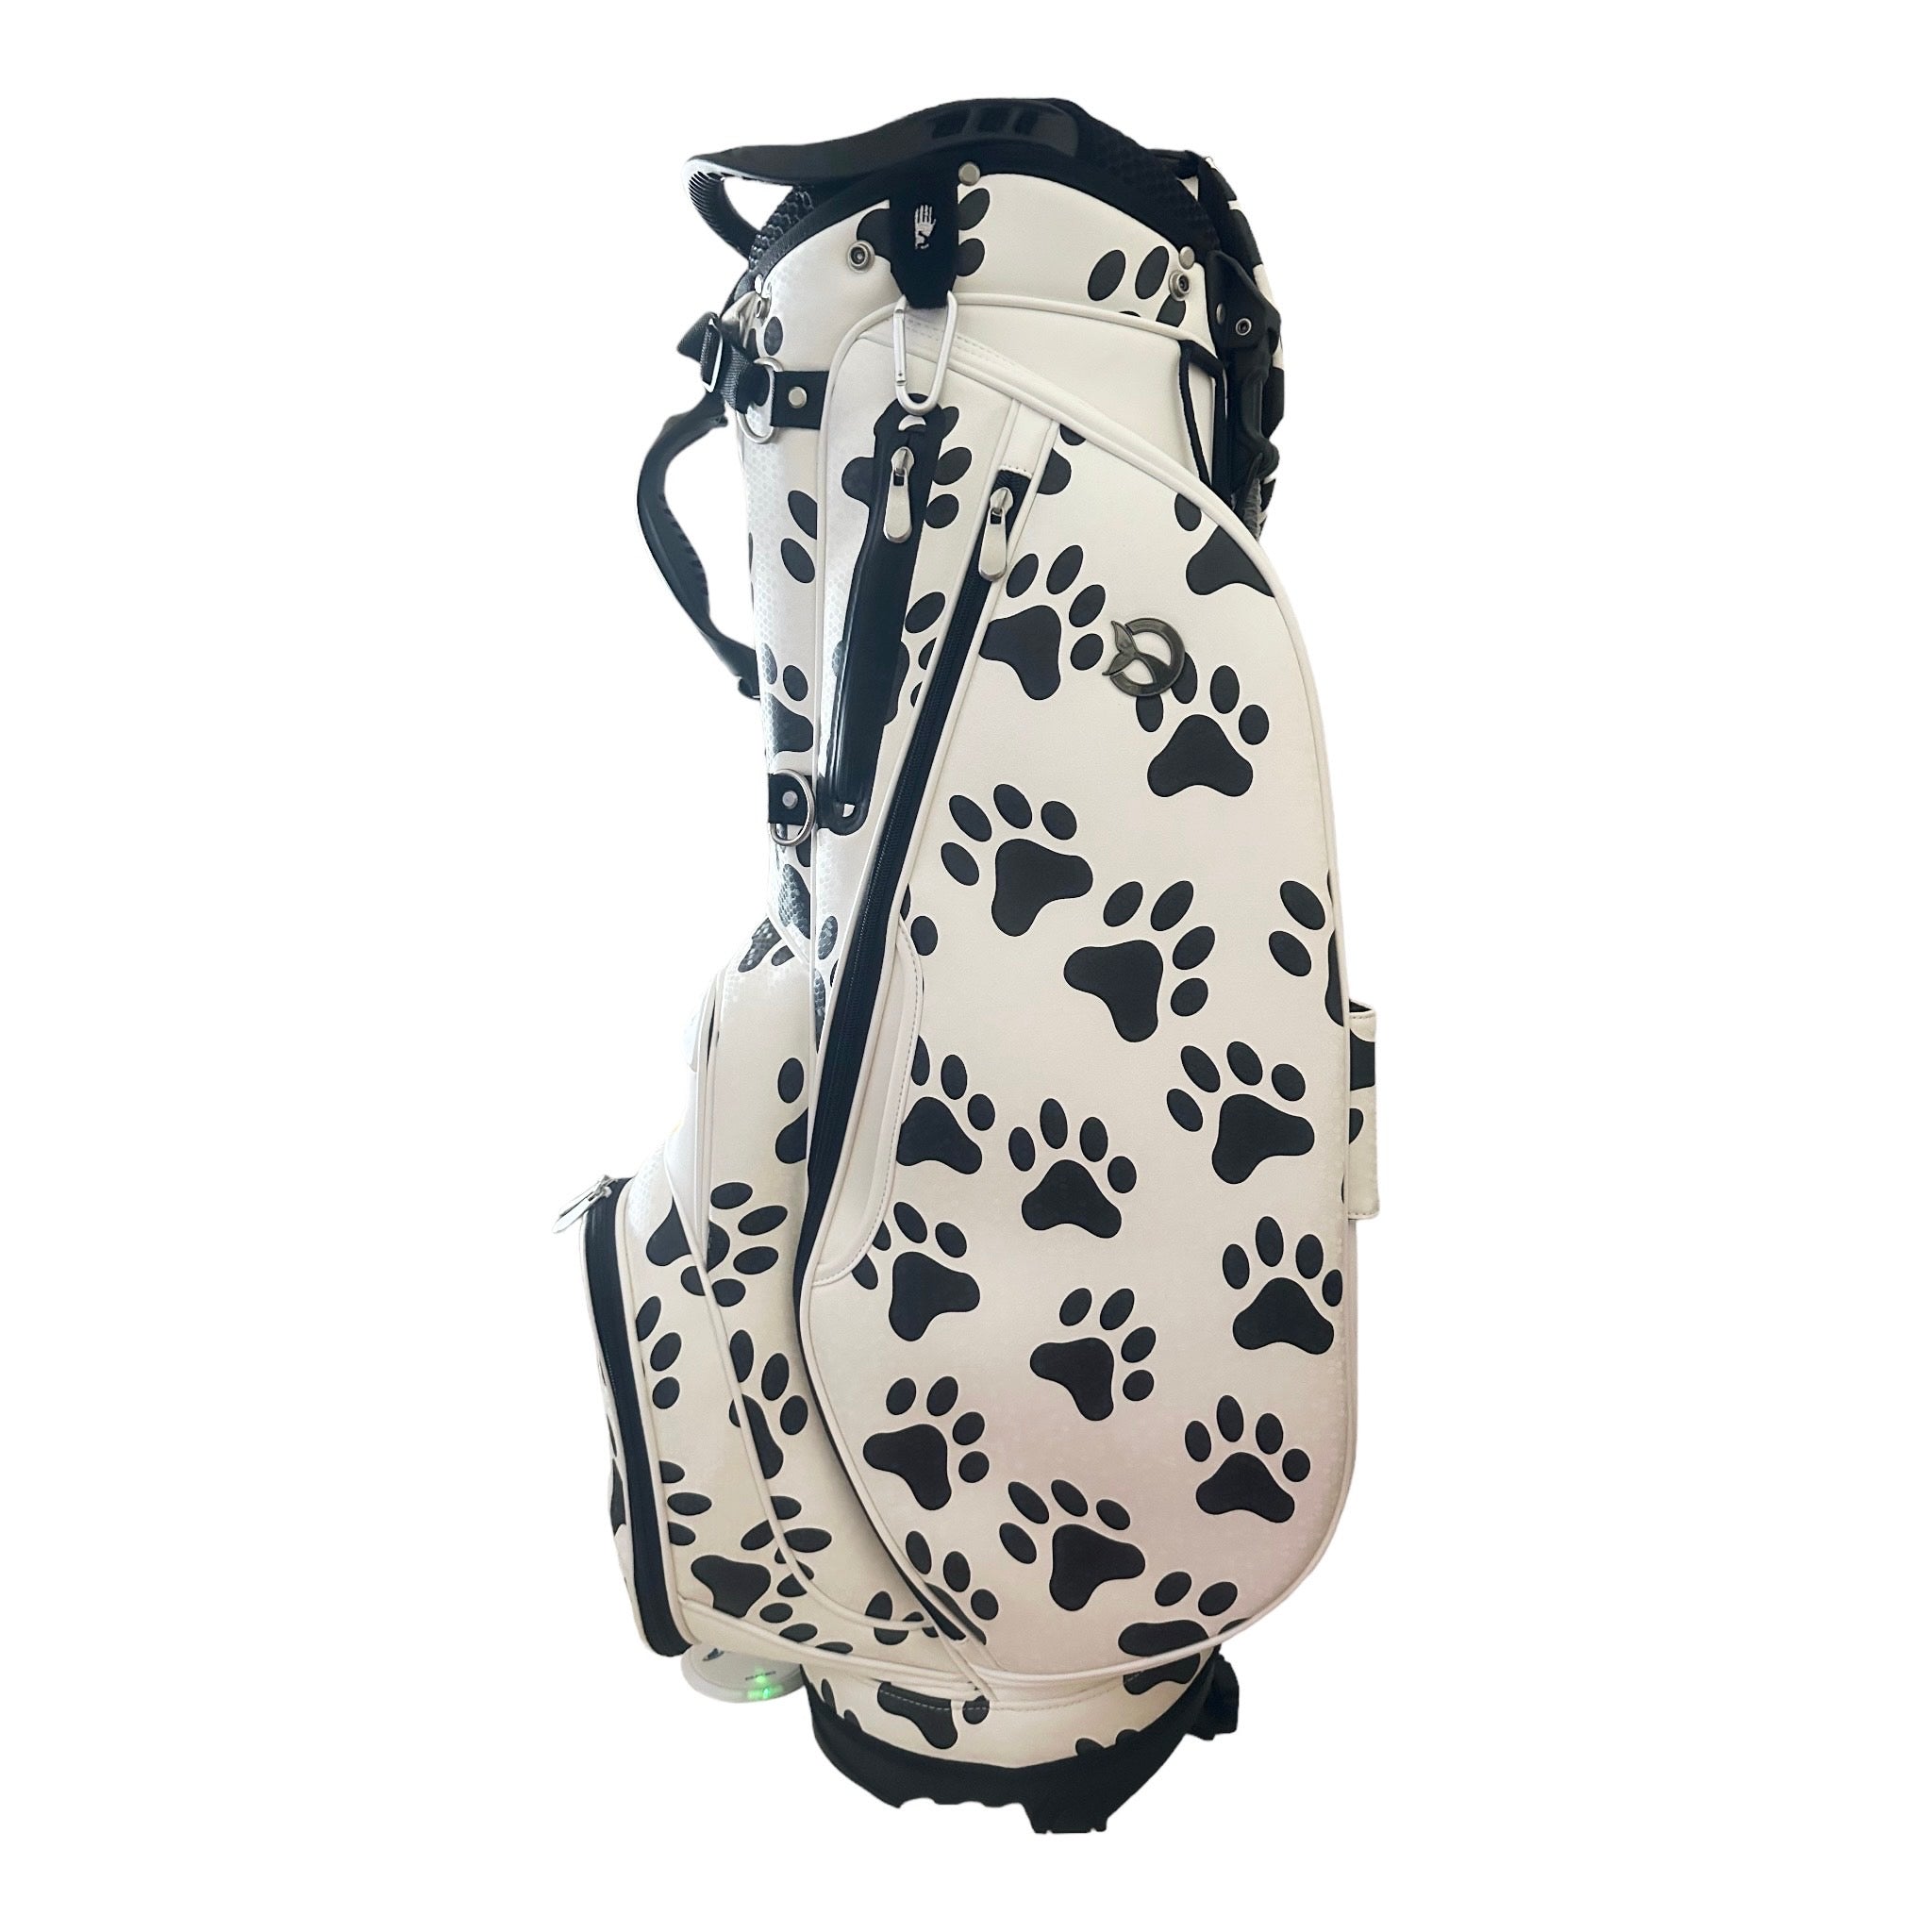 The Exclusive Paws Golf Collection by ORCA Golf